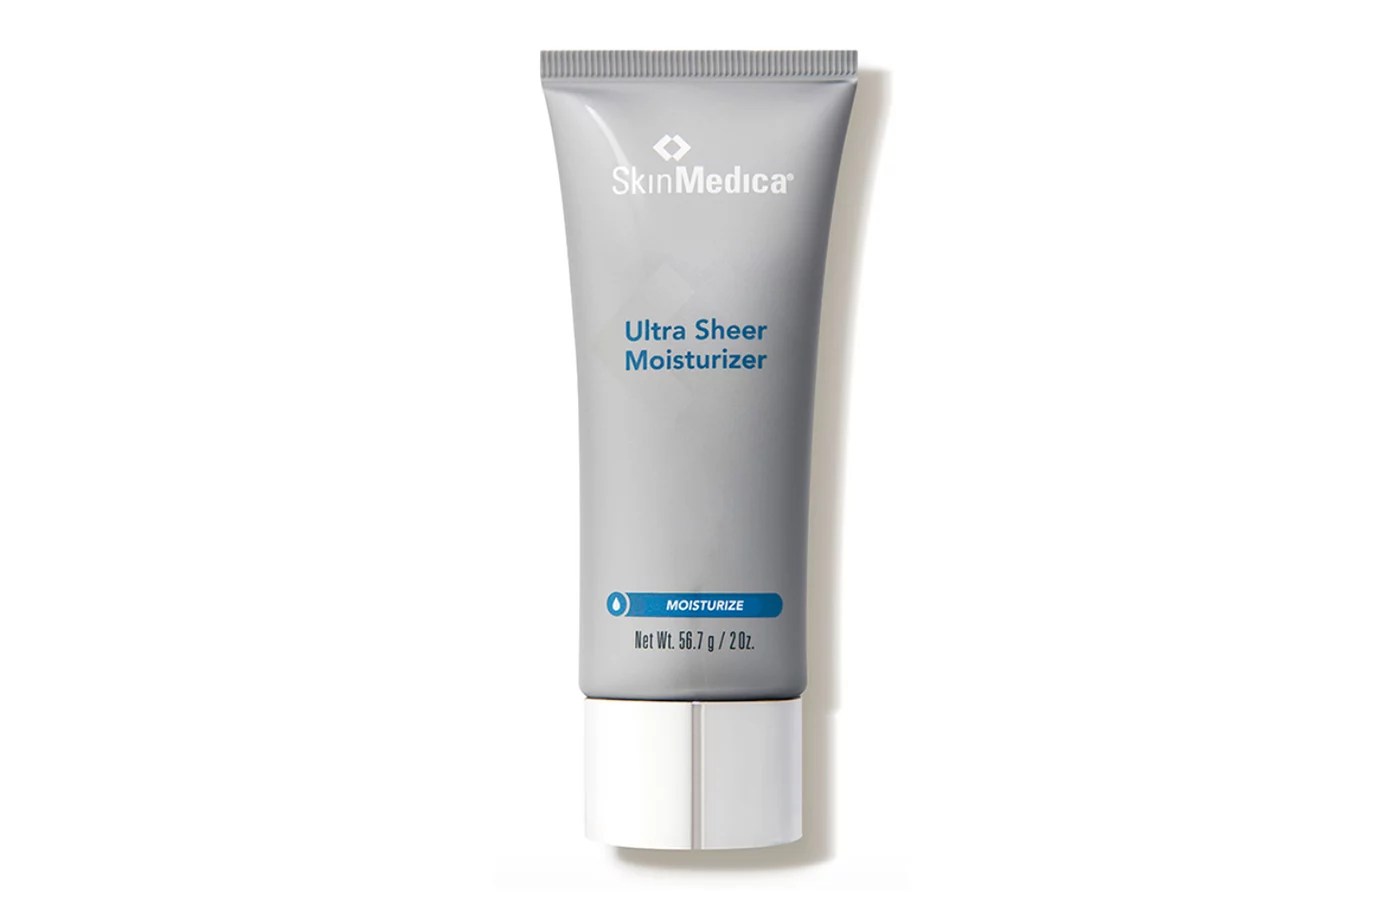 A bottle of skinmedica moisturizers for dry skin